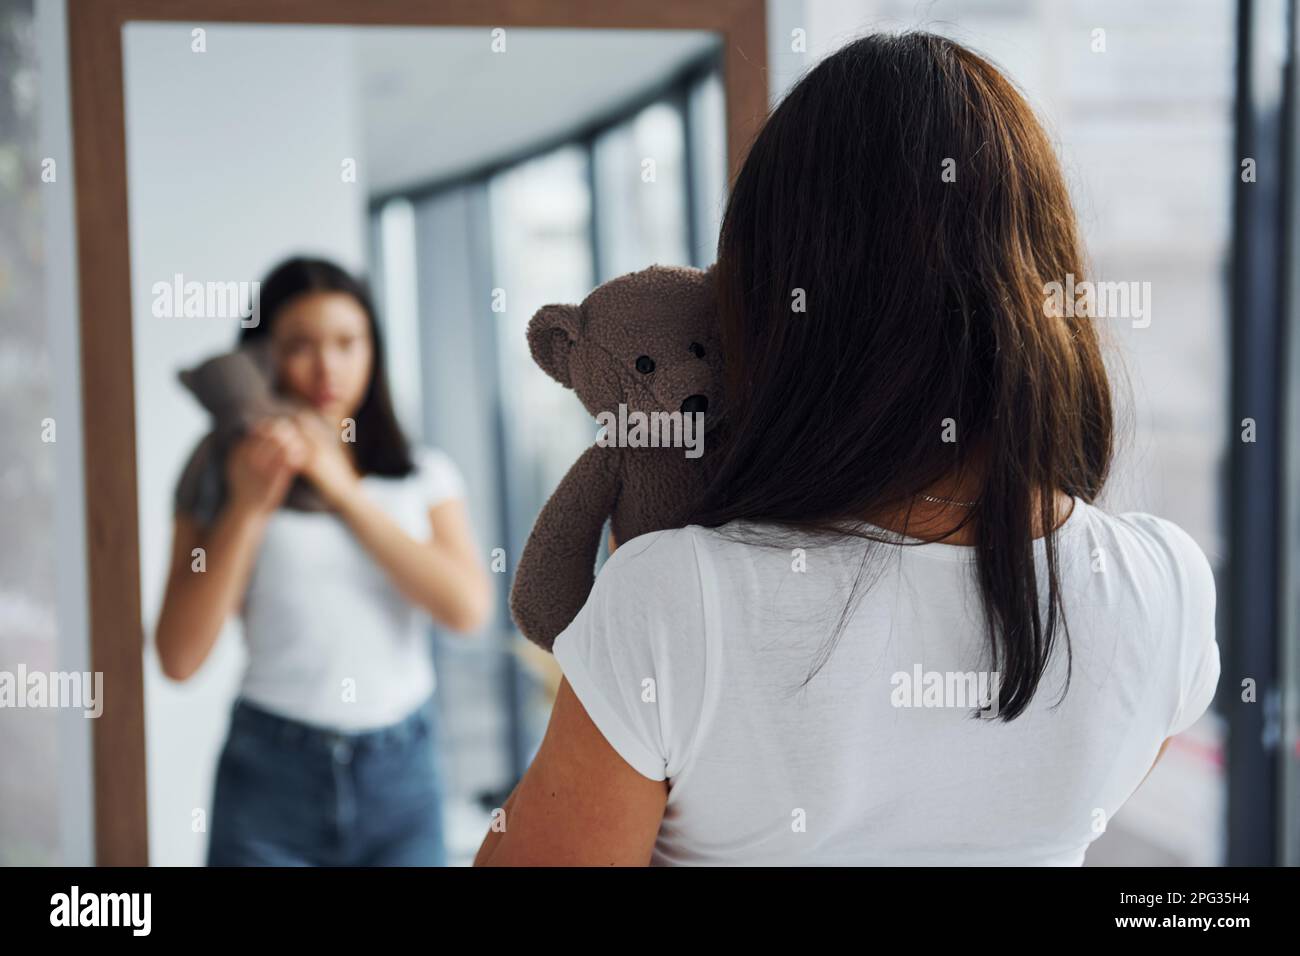 Young woman holds teddy bear and looks at herself into the mirror Stock Photo